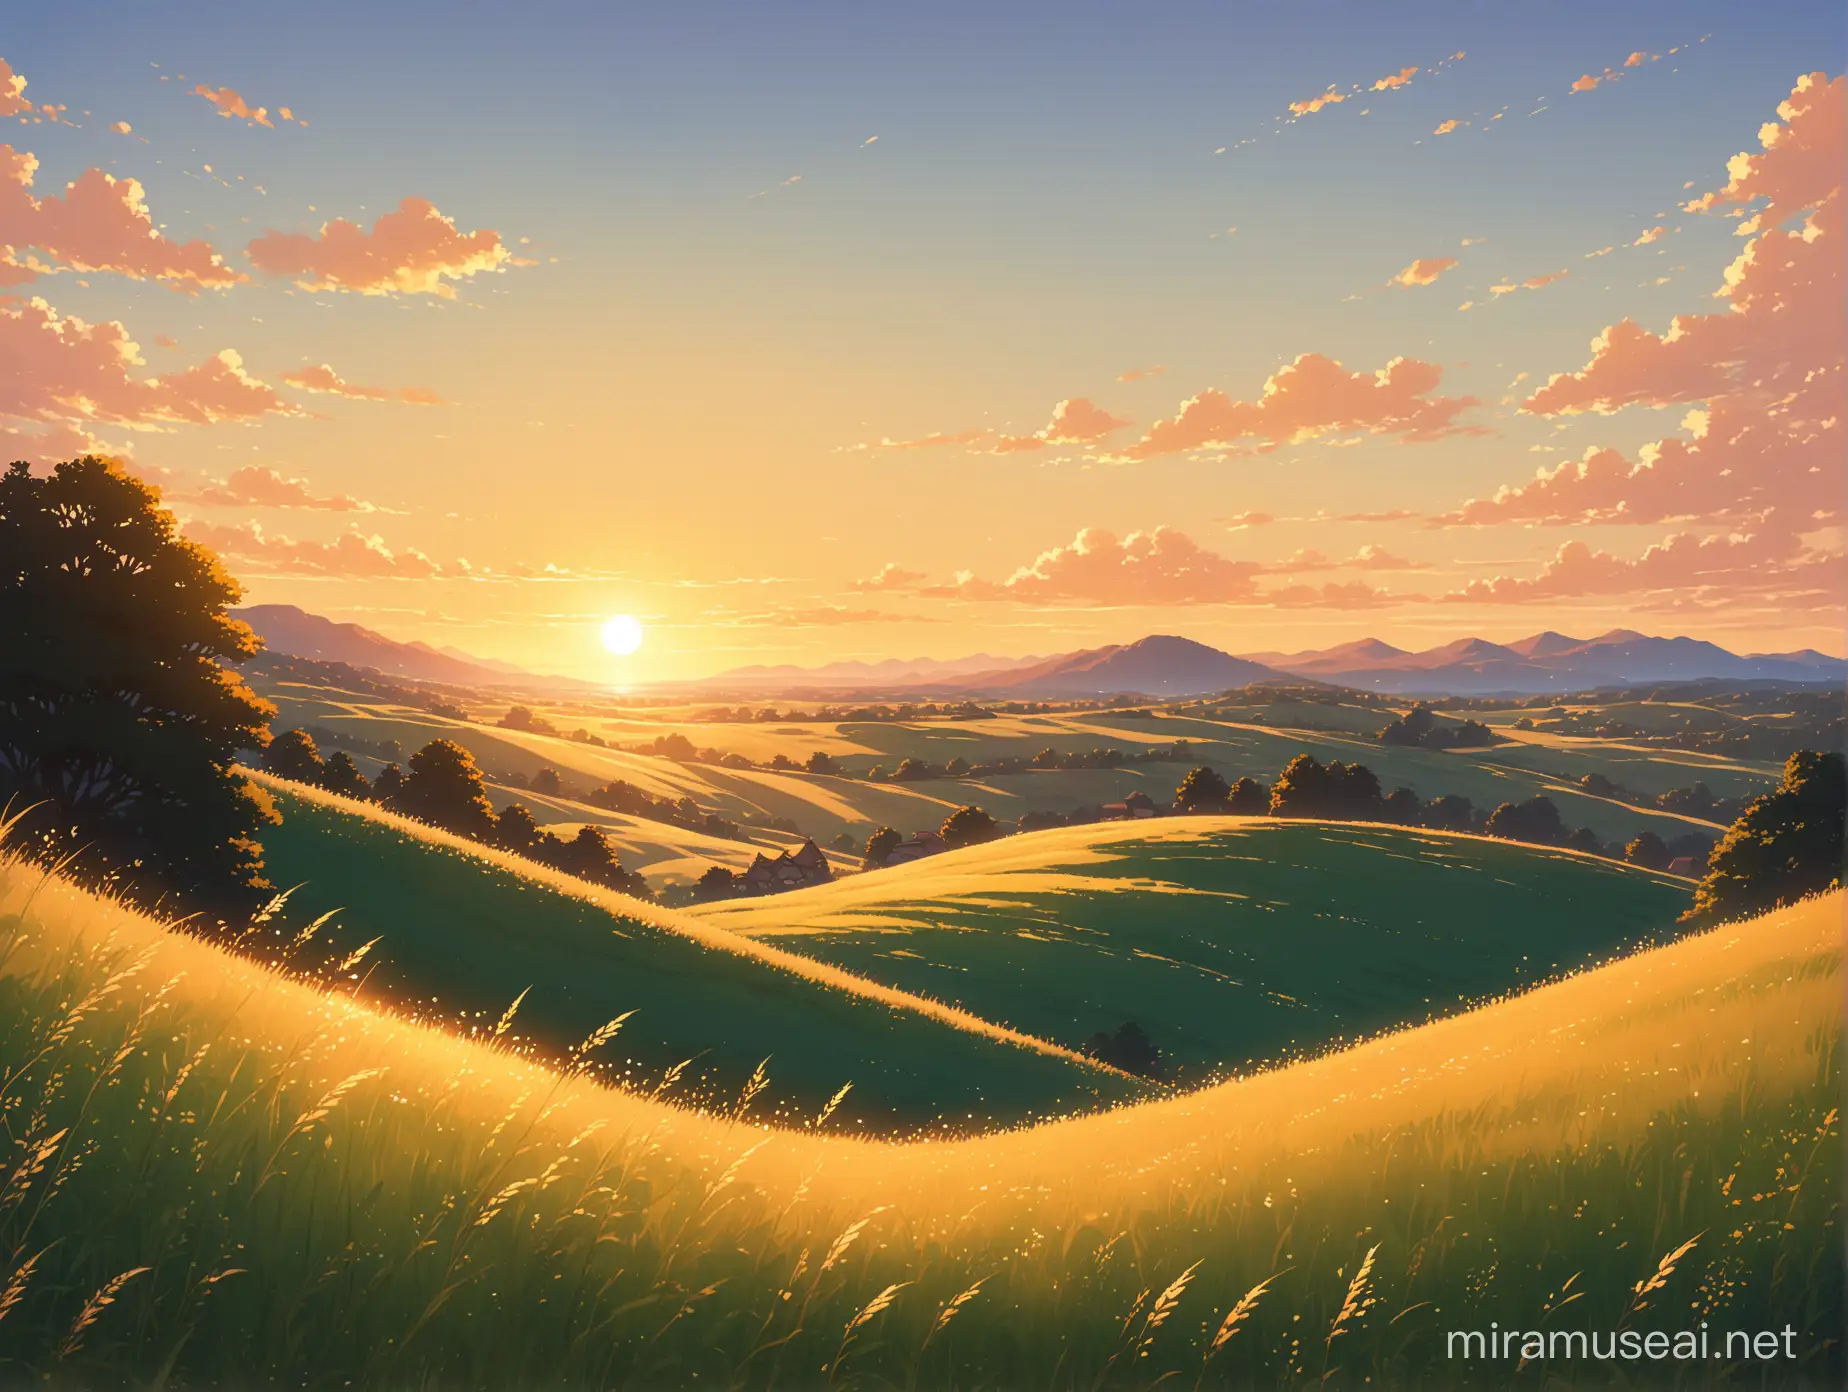 Sunset Meadow in Ghibli Style with Golden Hour Ambiance